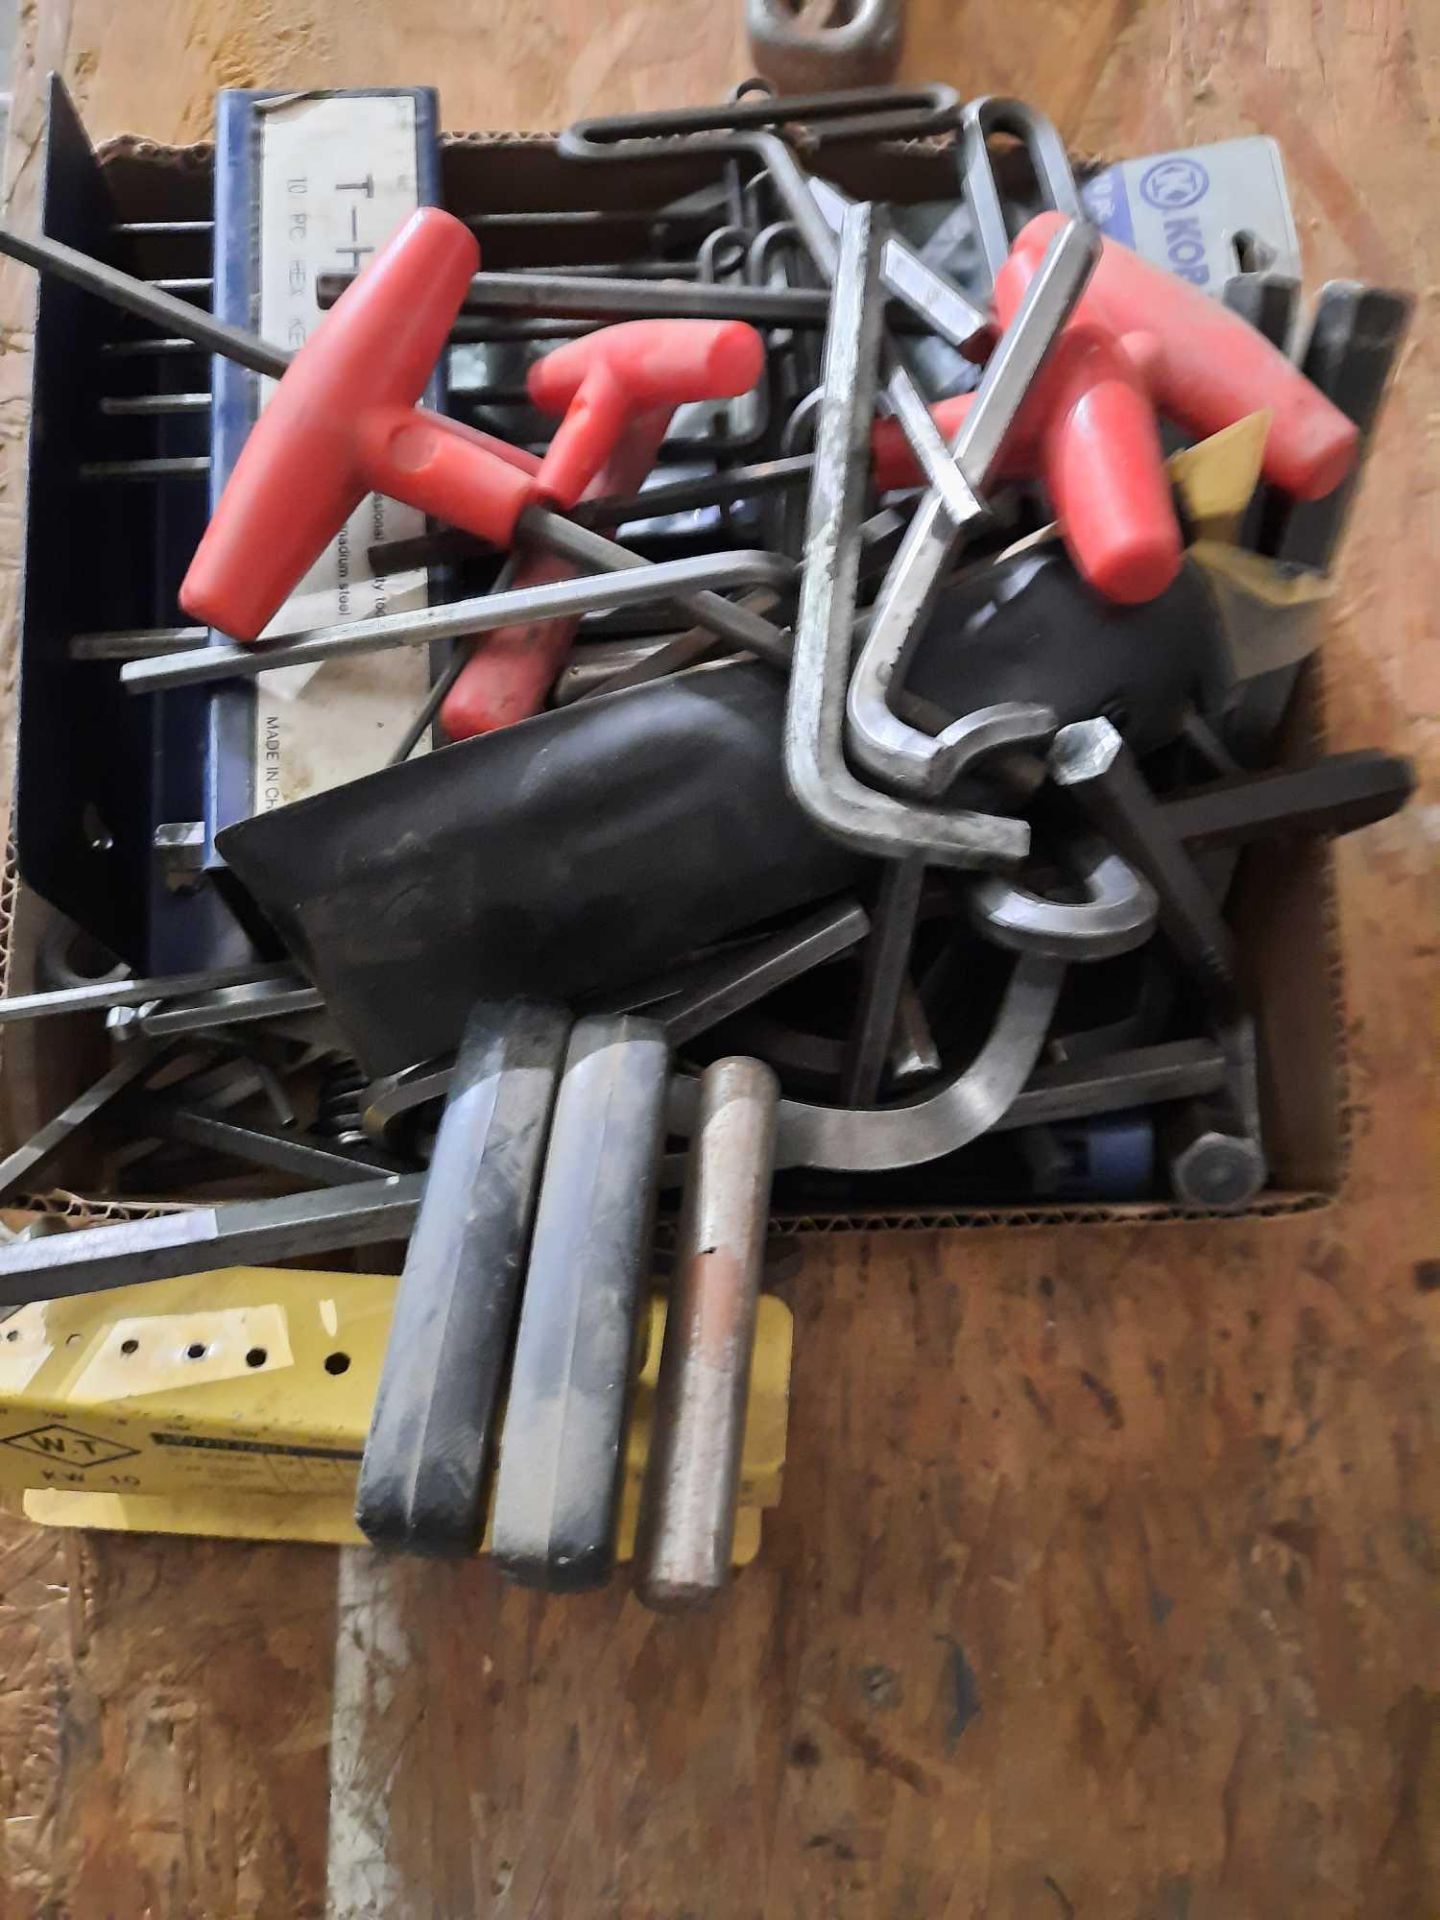 Assorted allen wrenches